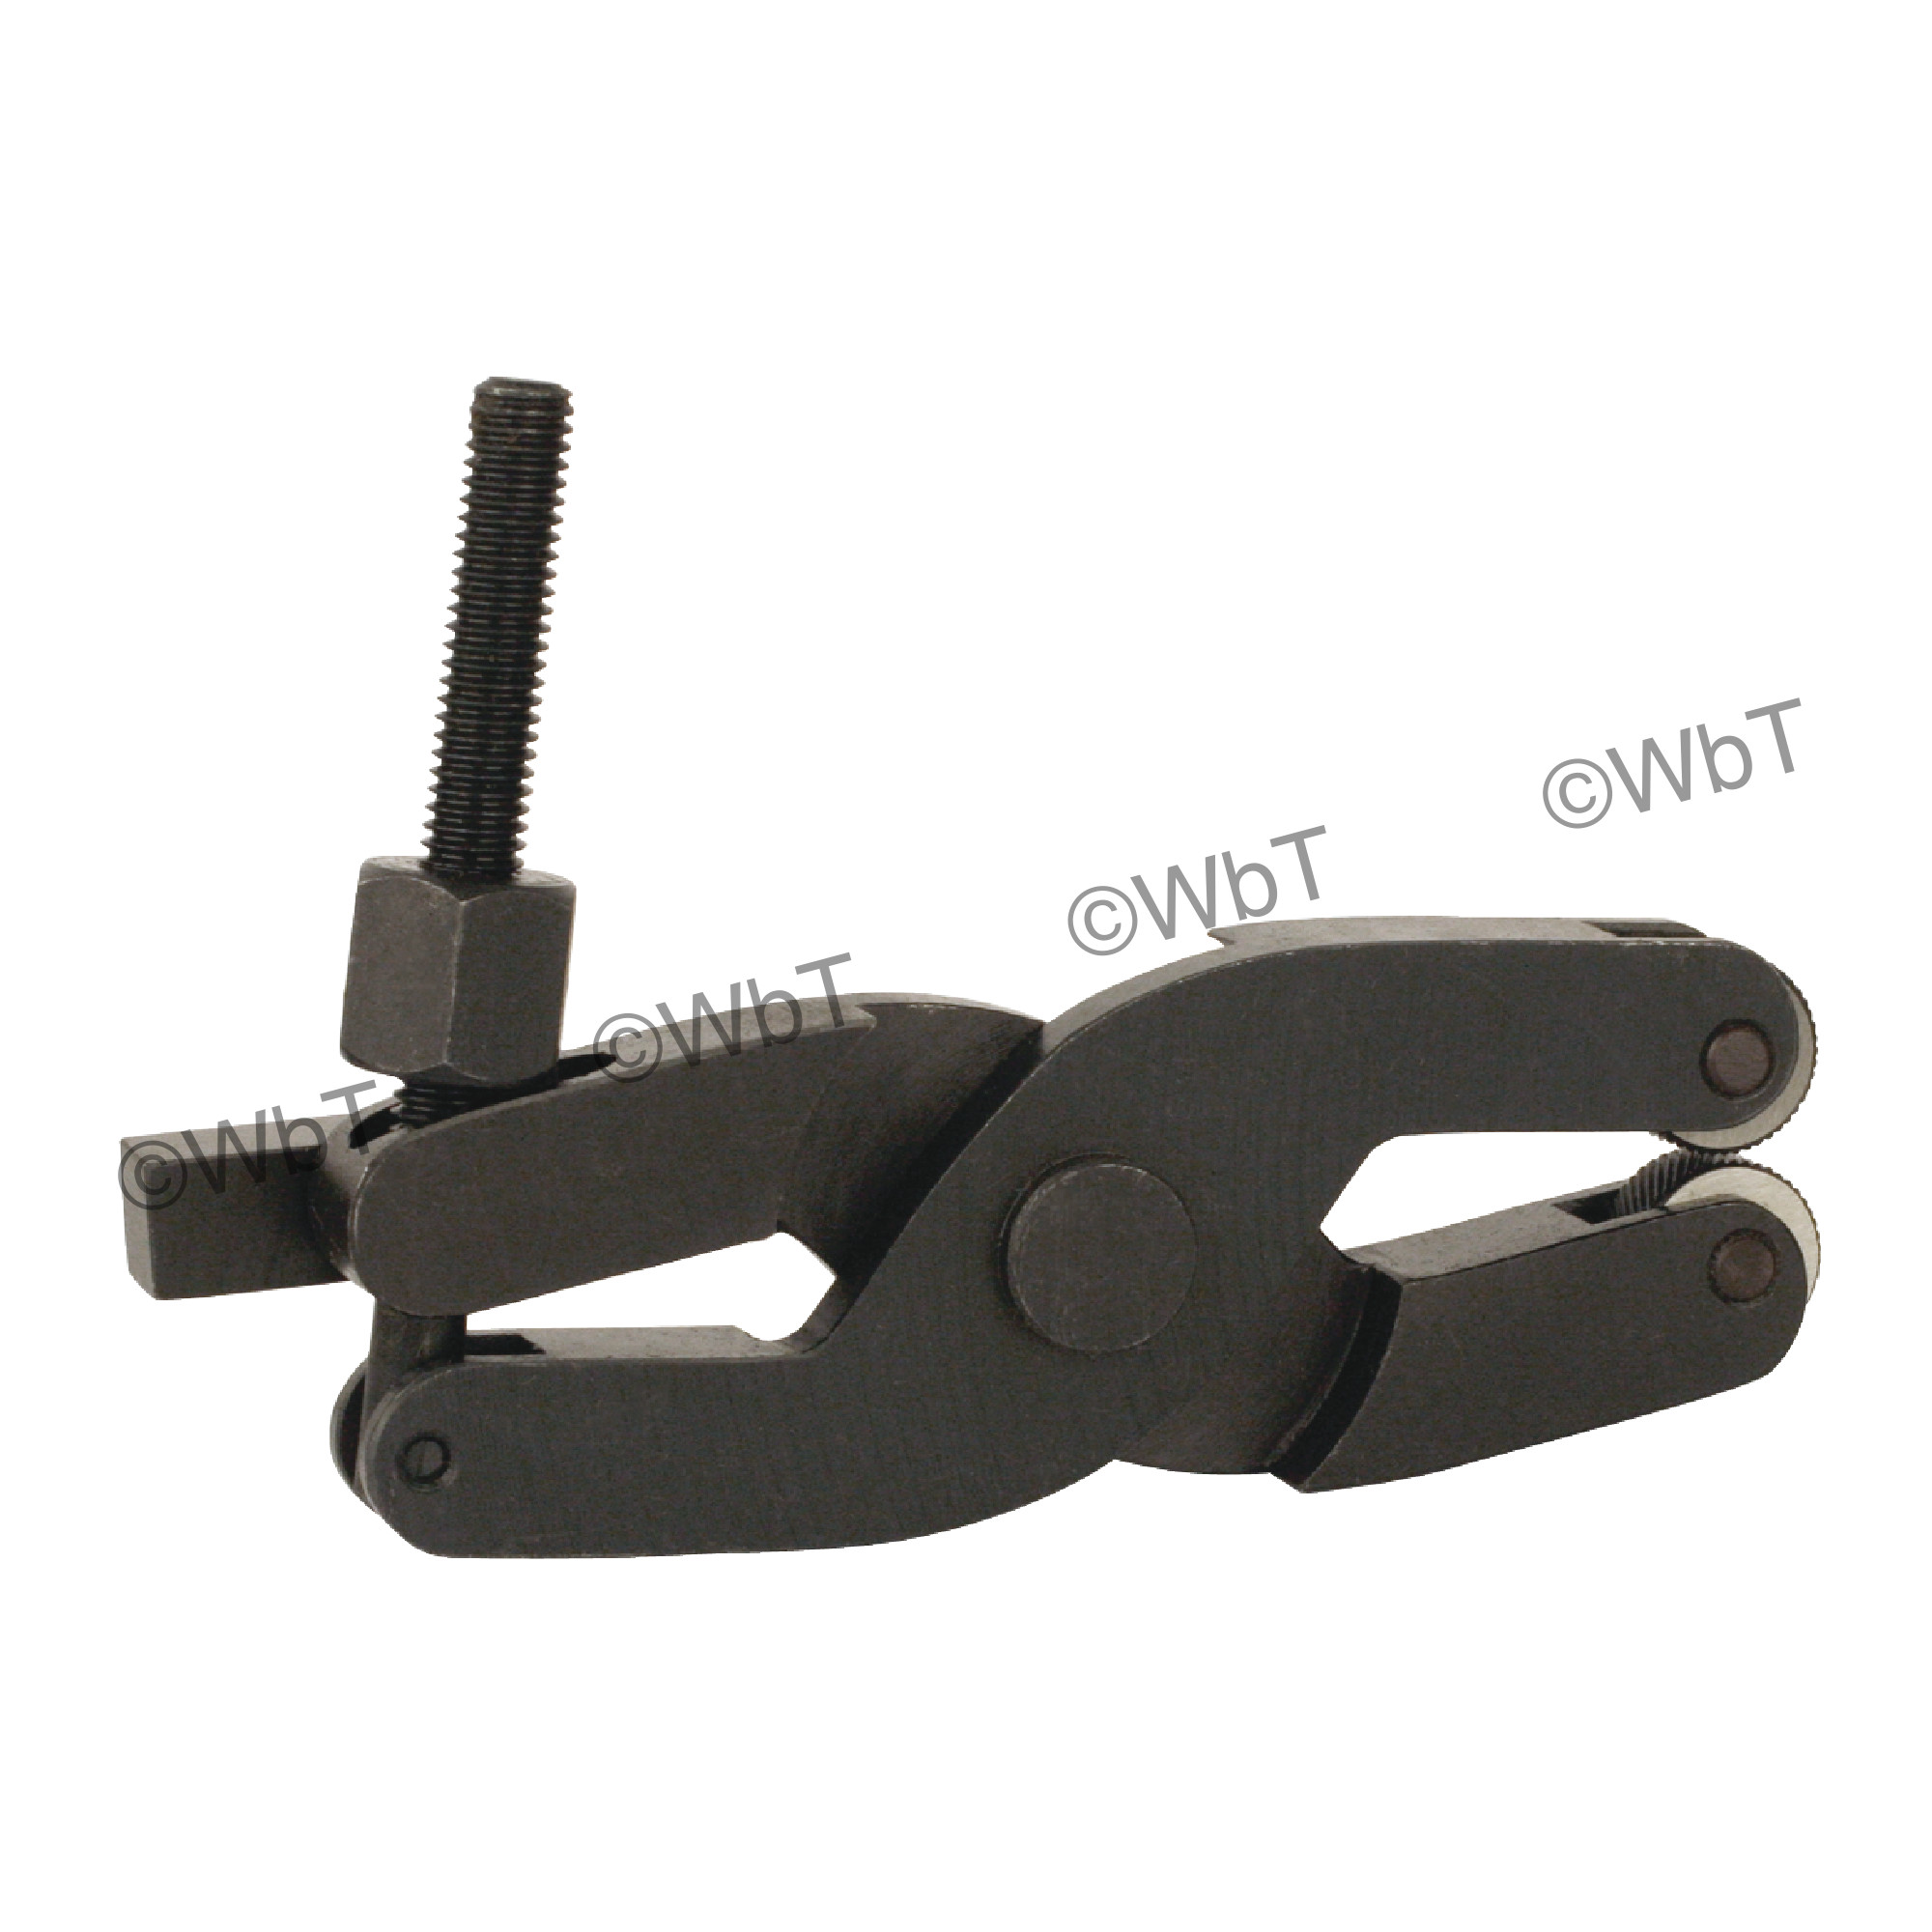 Quick Acting Clamp Type Knurling Tool